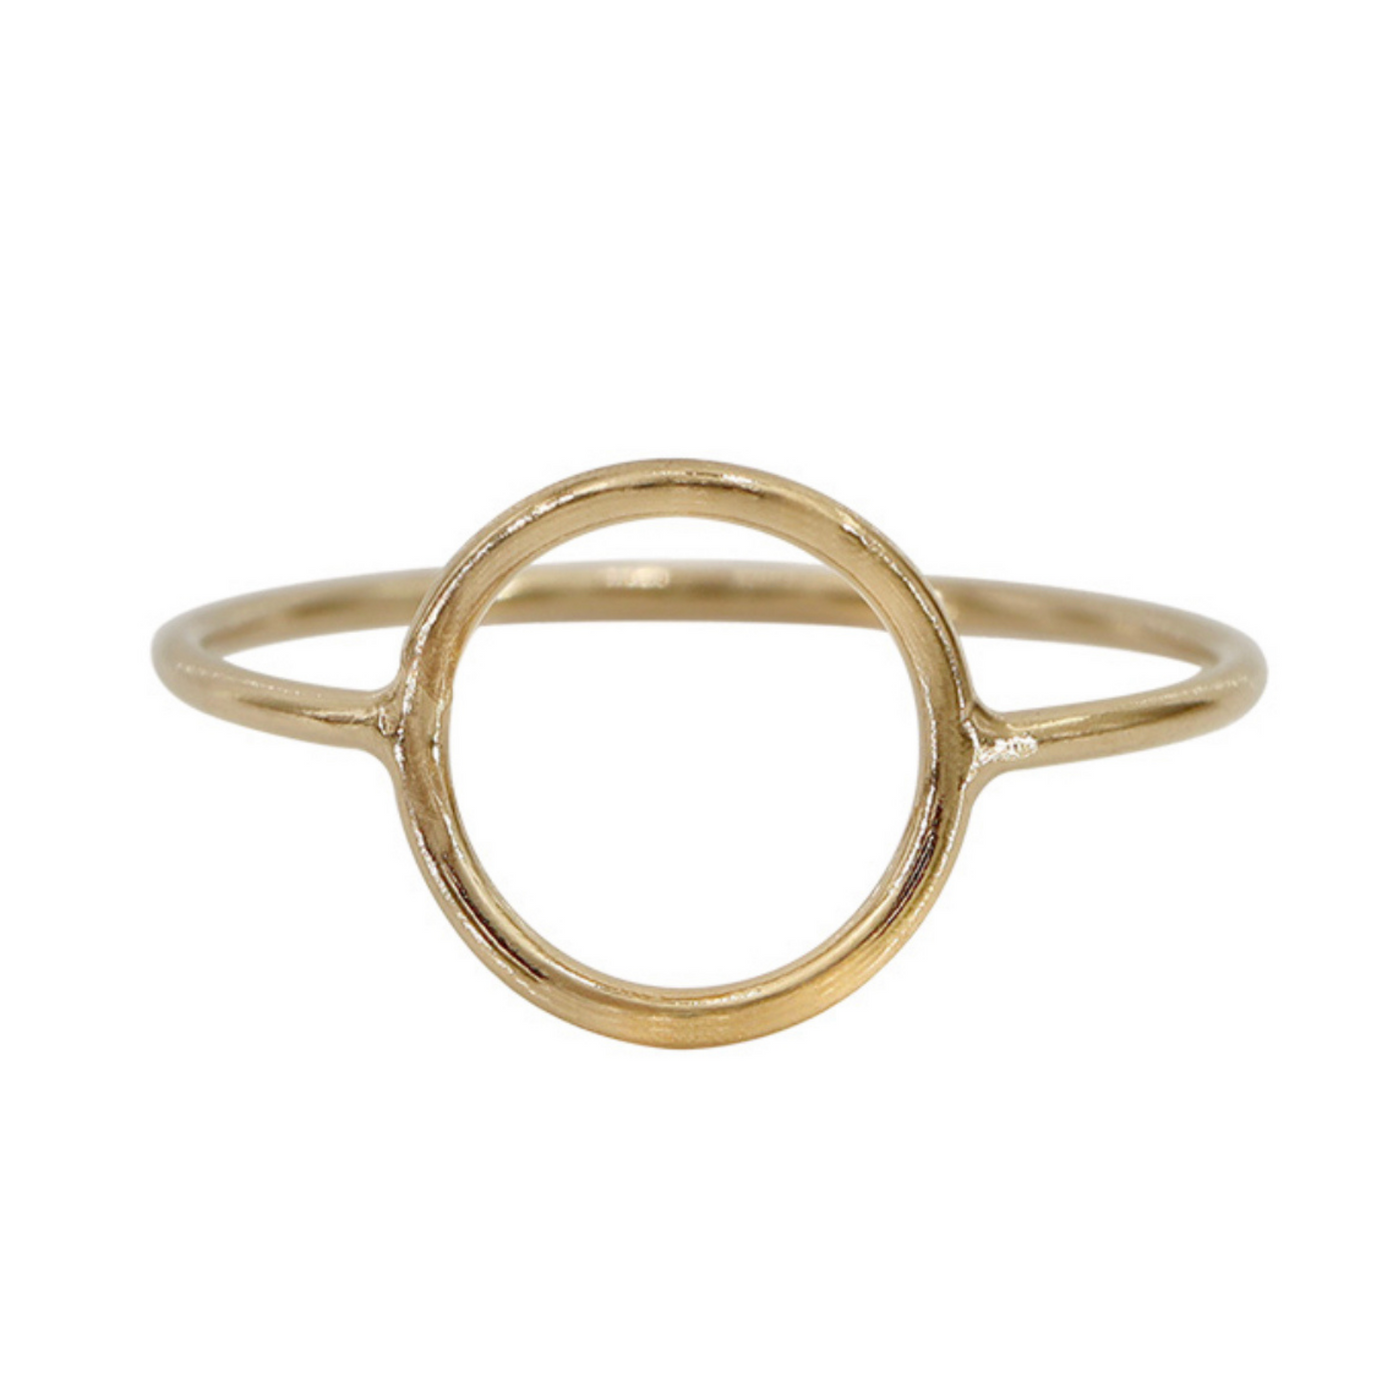 Highly polished 14KGF hollow circle stacking ring on white background.